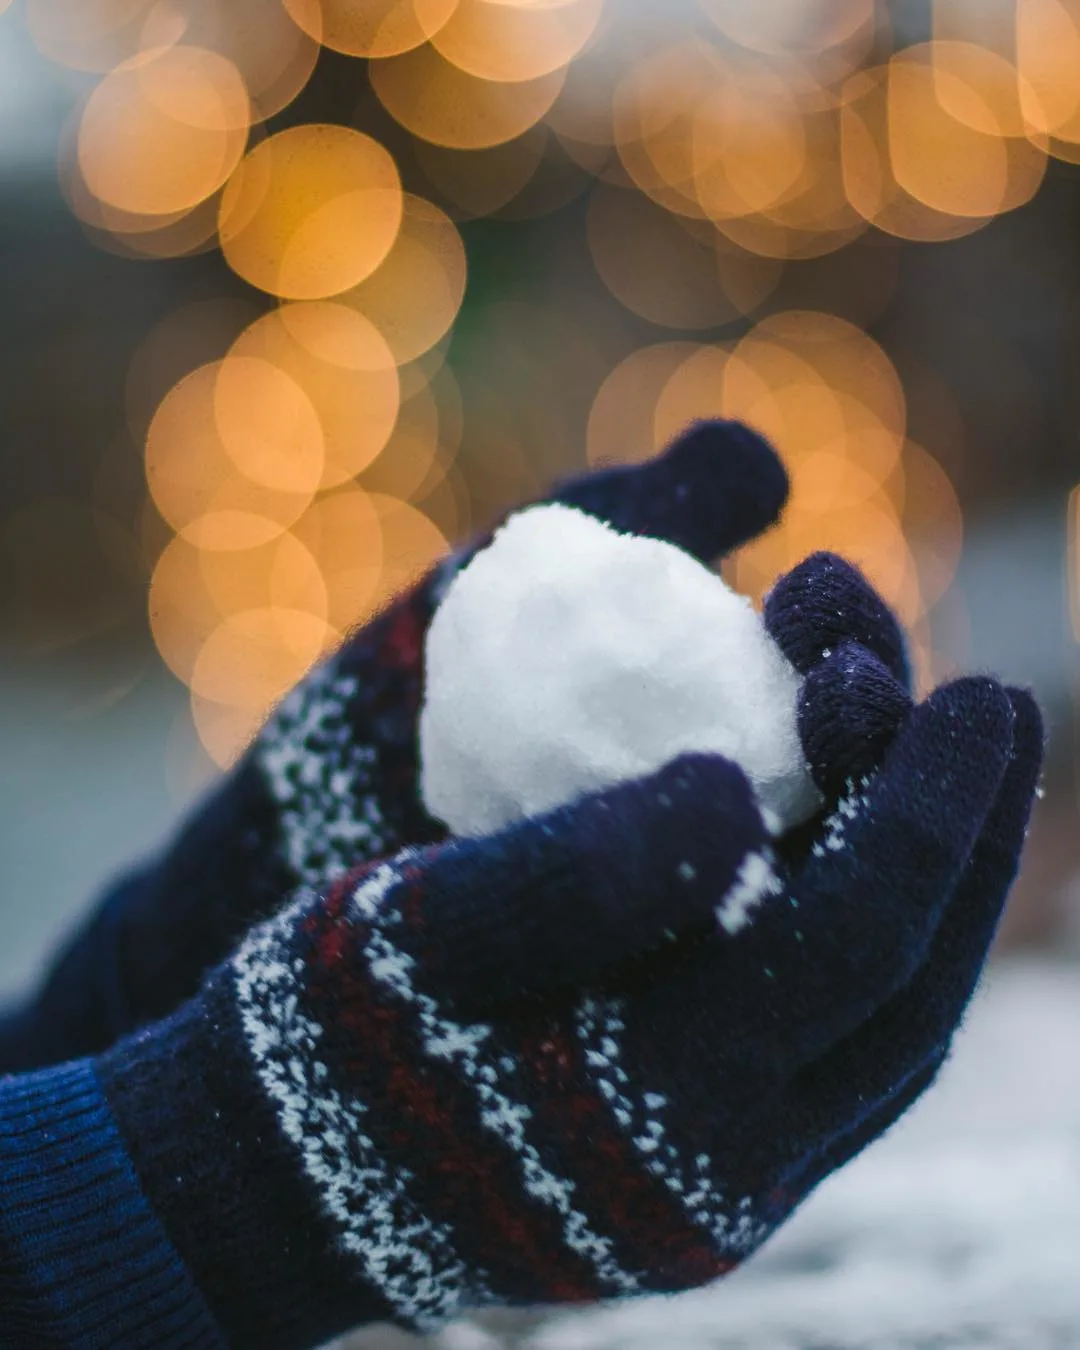 Holding snowball with MUJI winter gloves against holiday lights